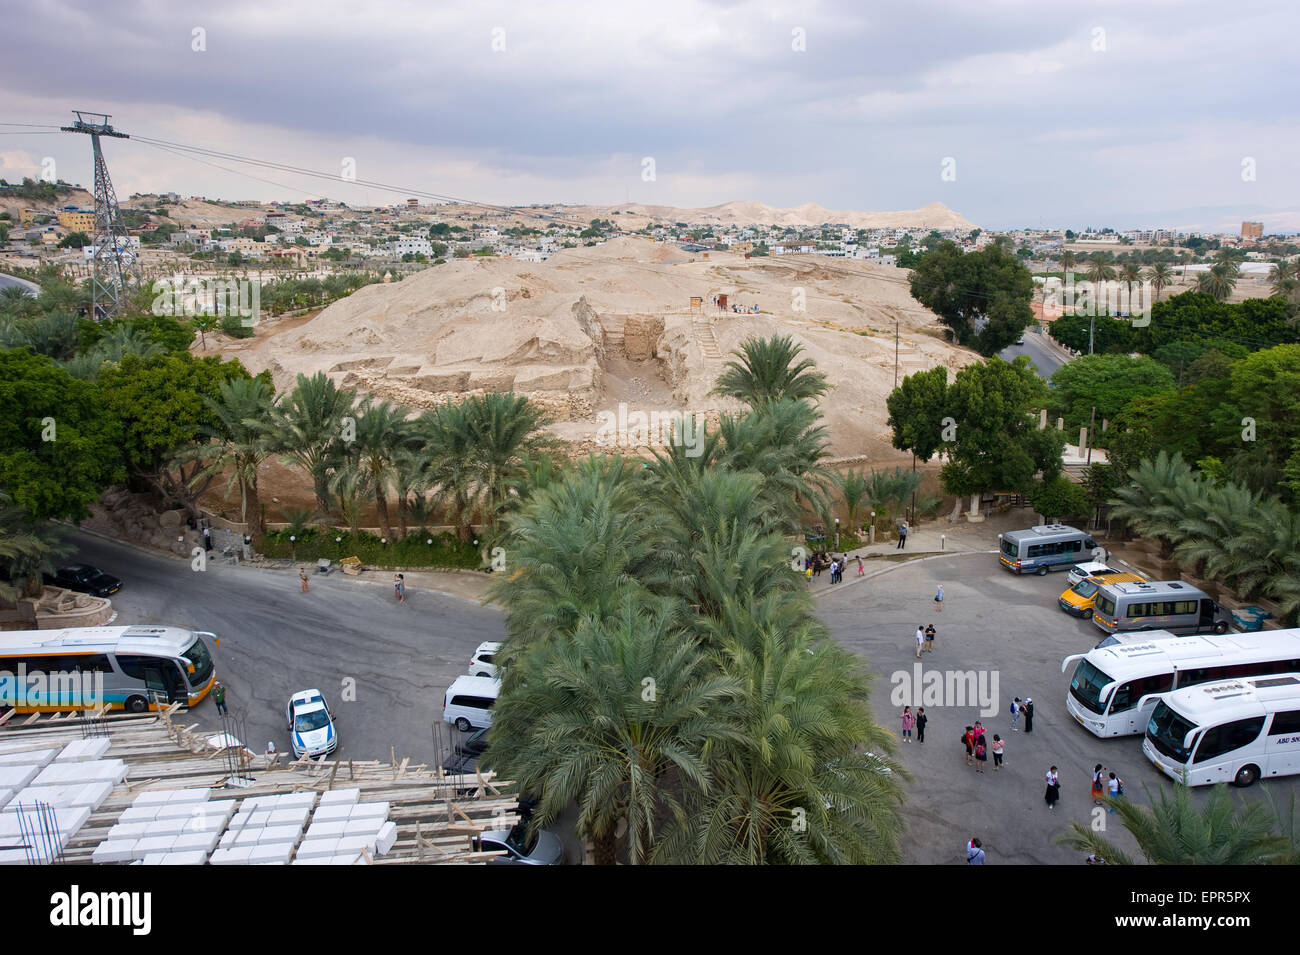 JERICHO, ISRAEL - OCT 15, 2014: Tourists visiting the oldest city in the world Jericho also called Tell es-Sultan. The mound is Stock Photo